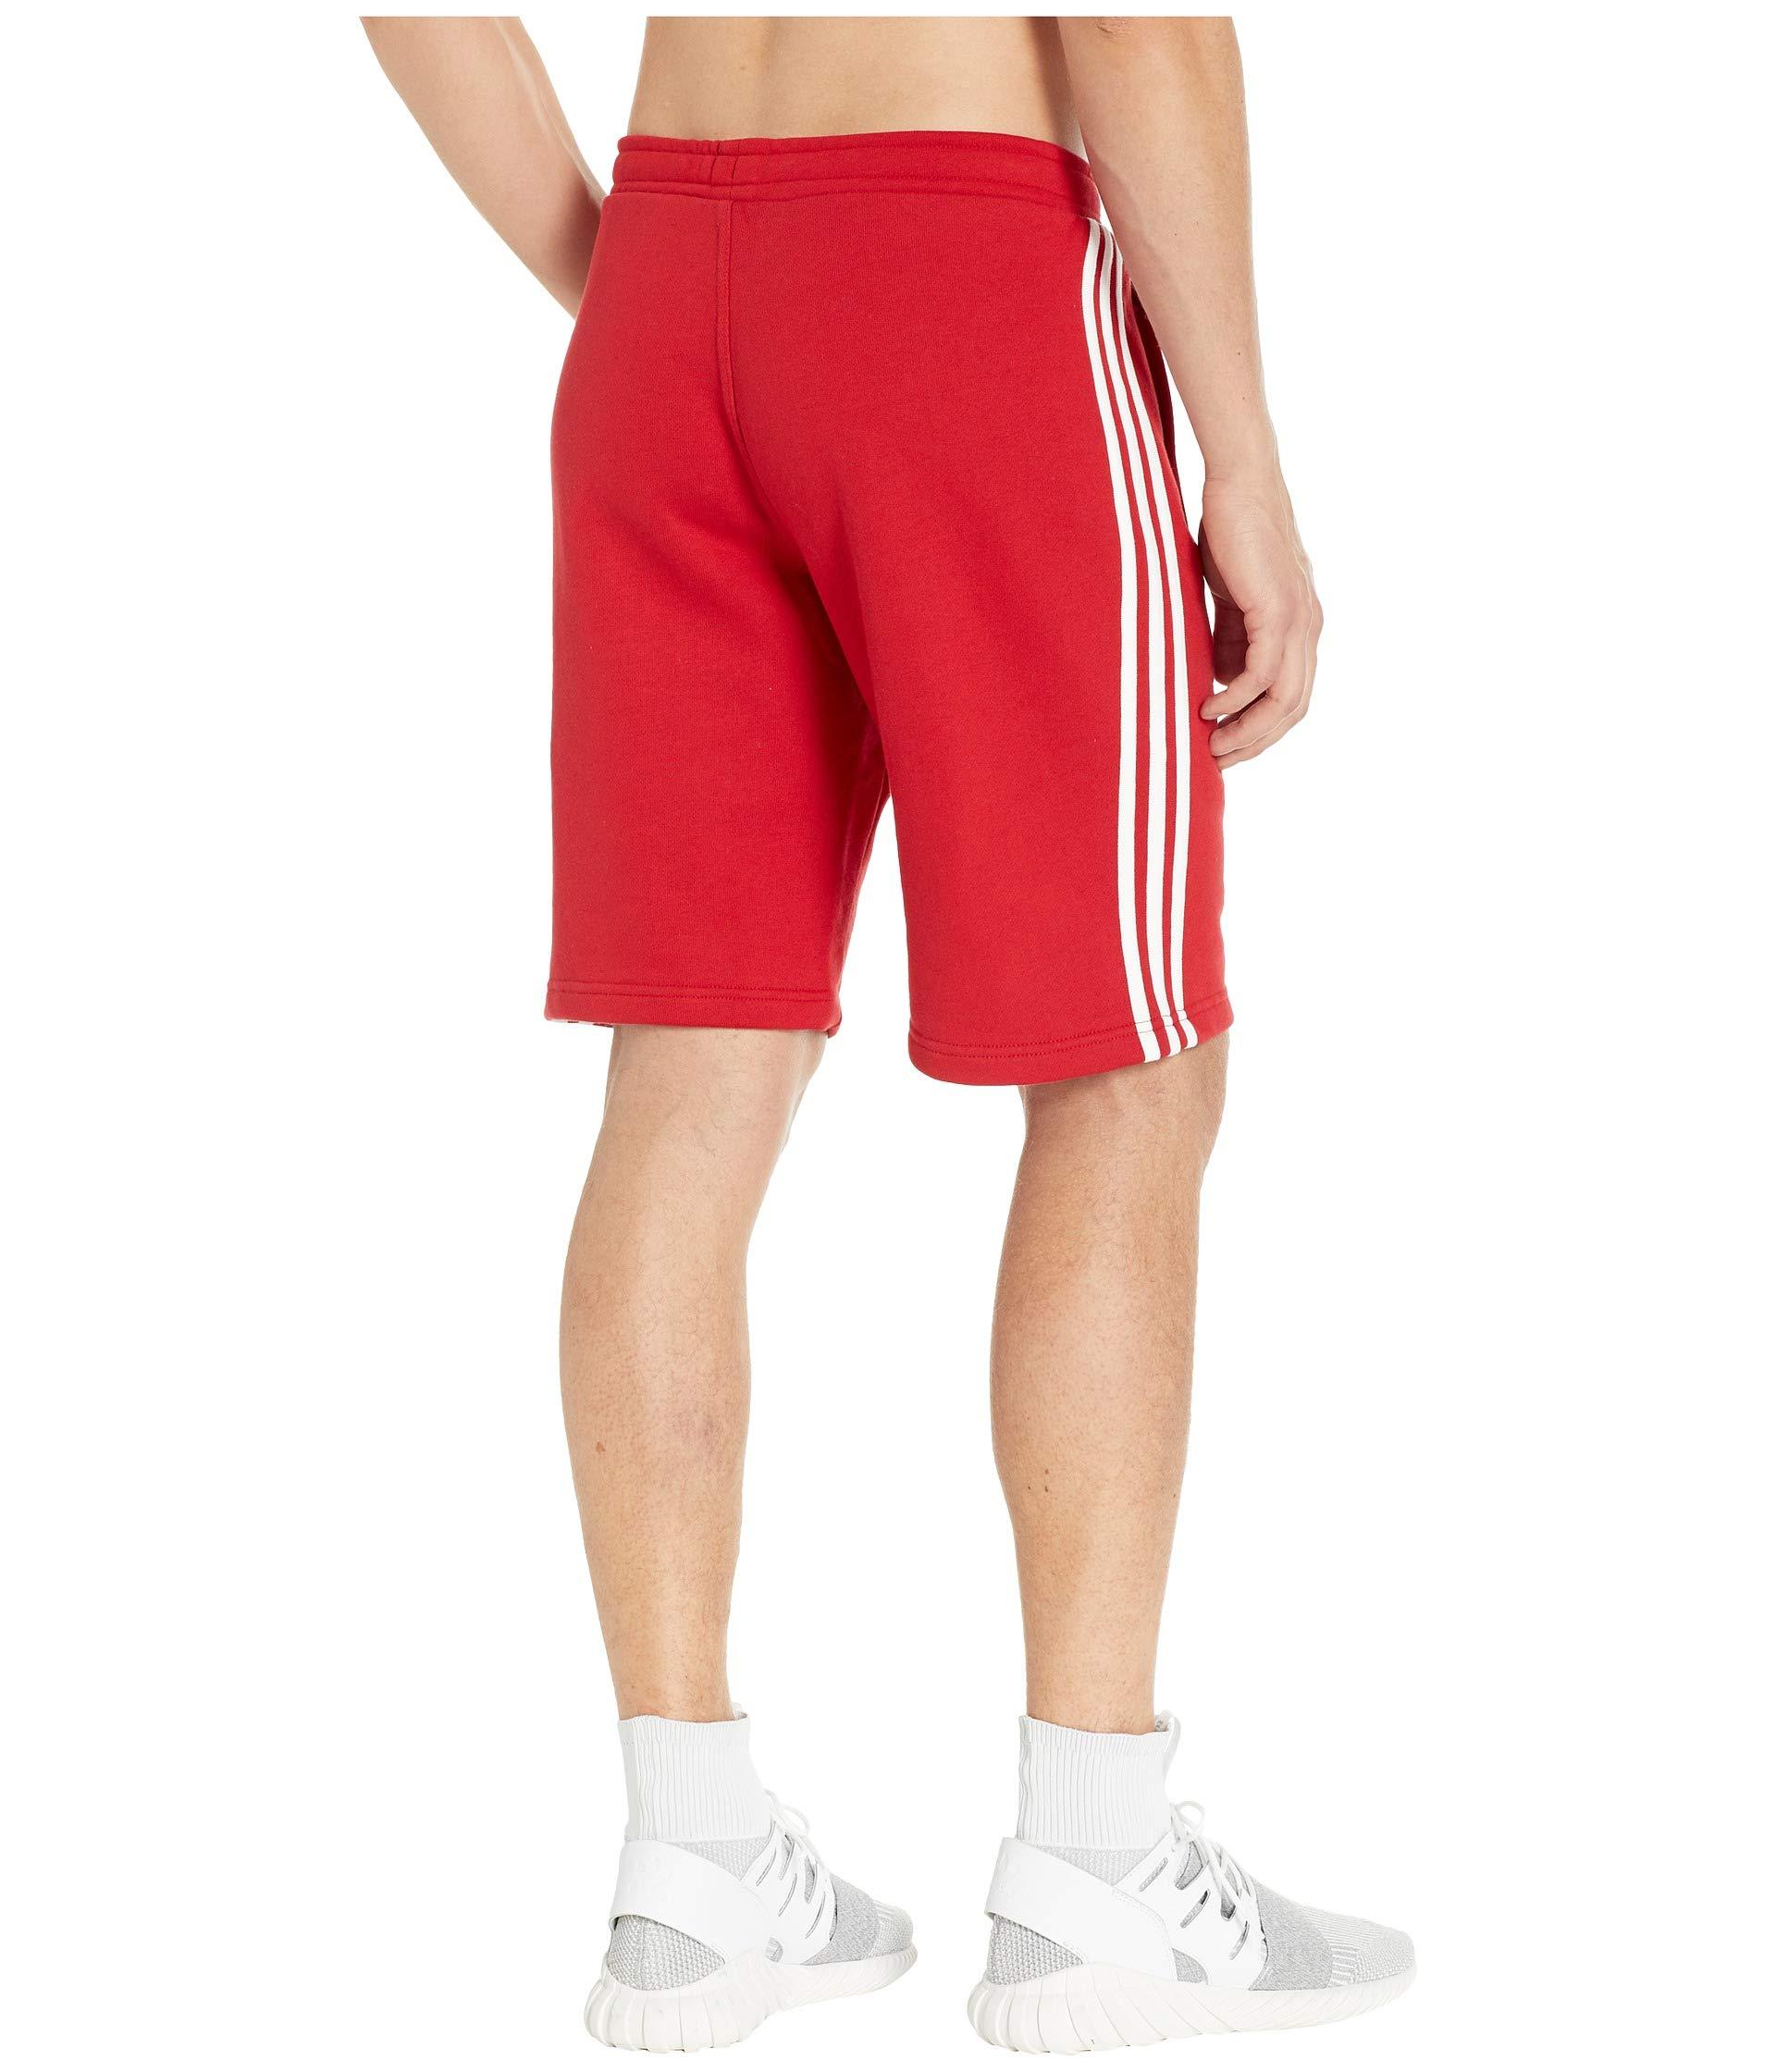 red adidas shorts mens for Sale OFF 71%